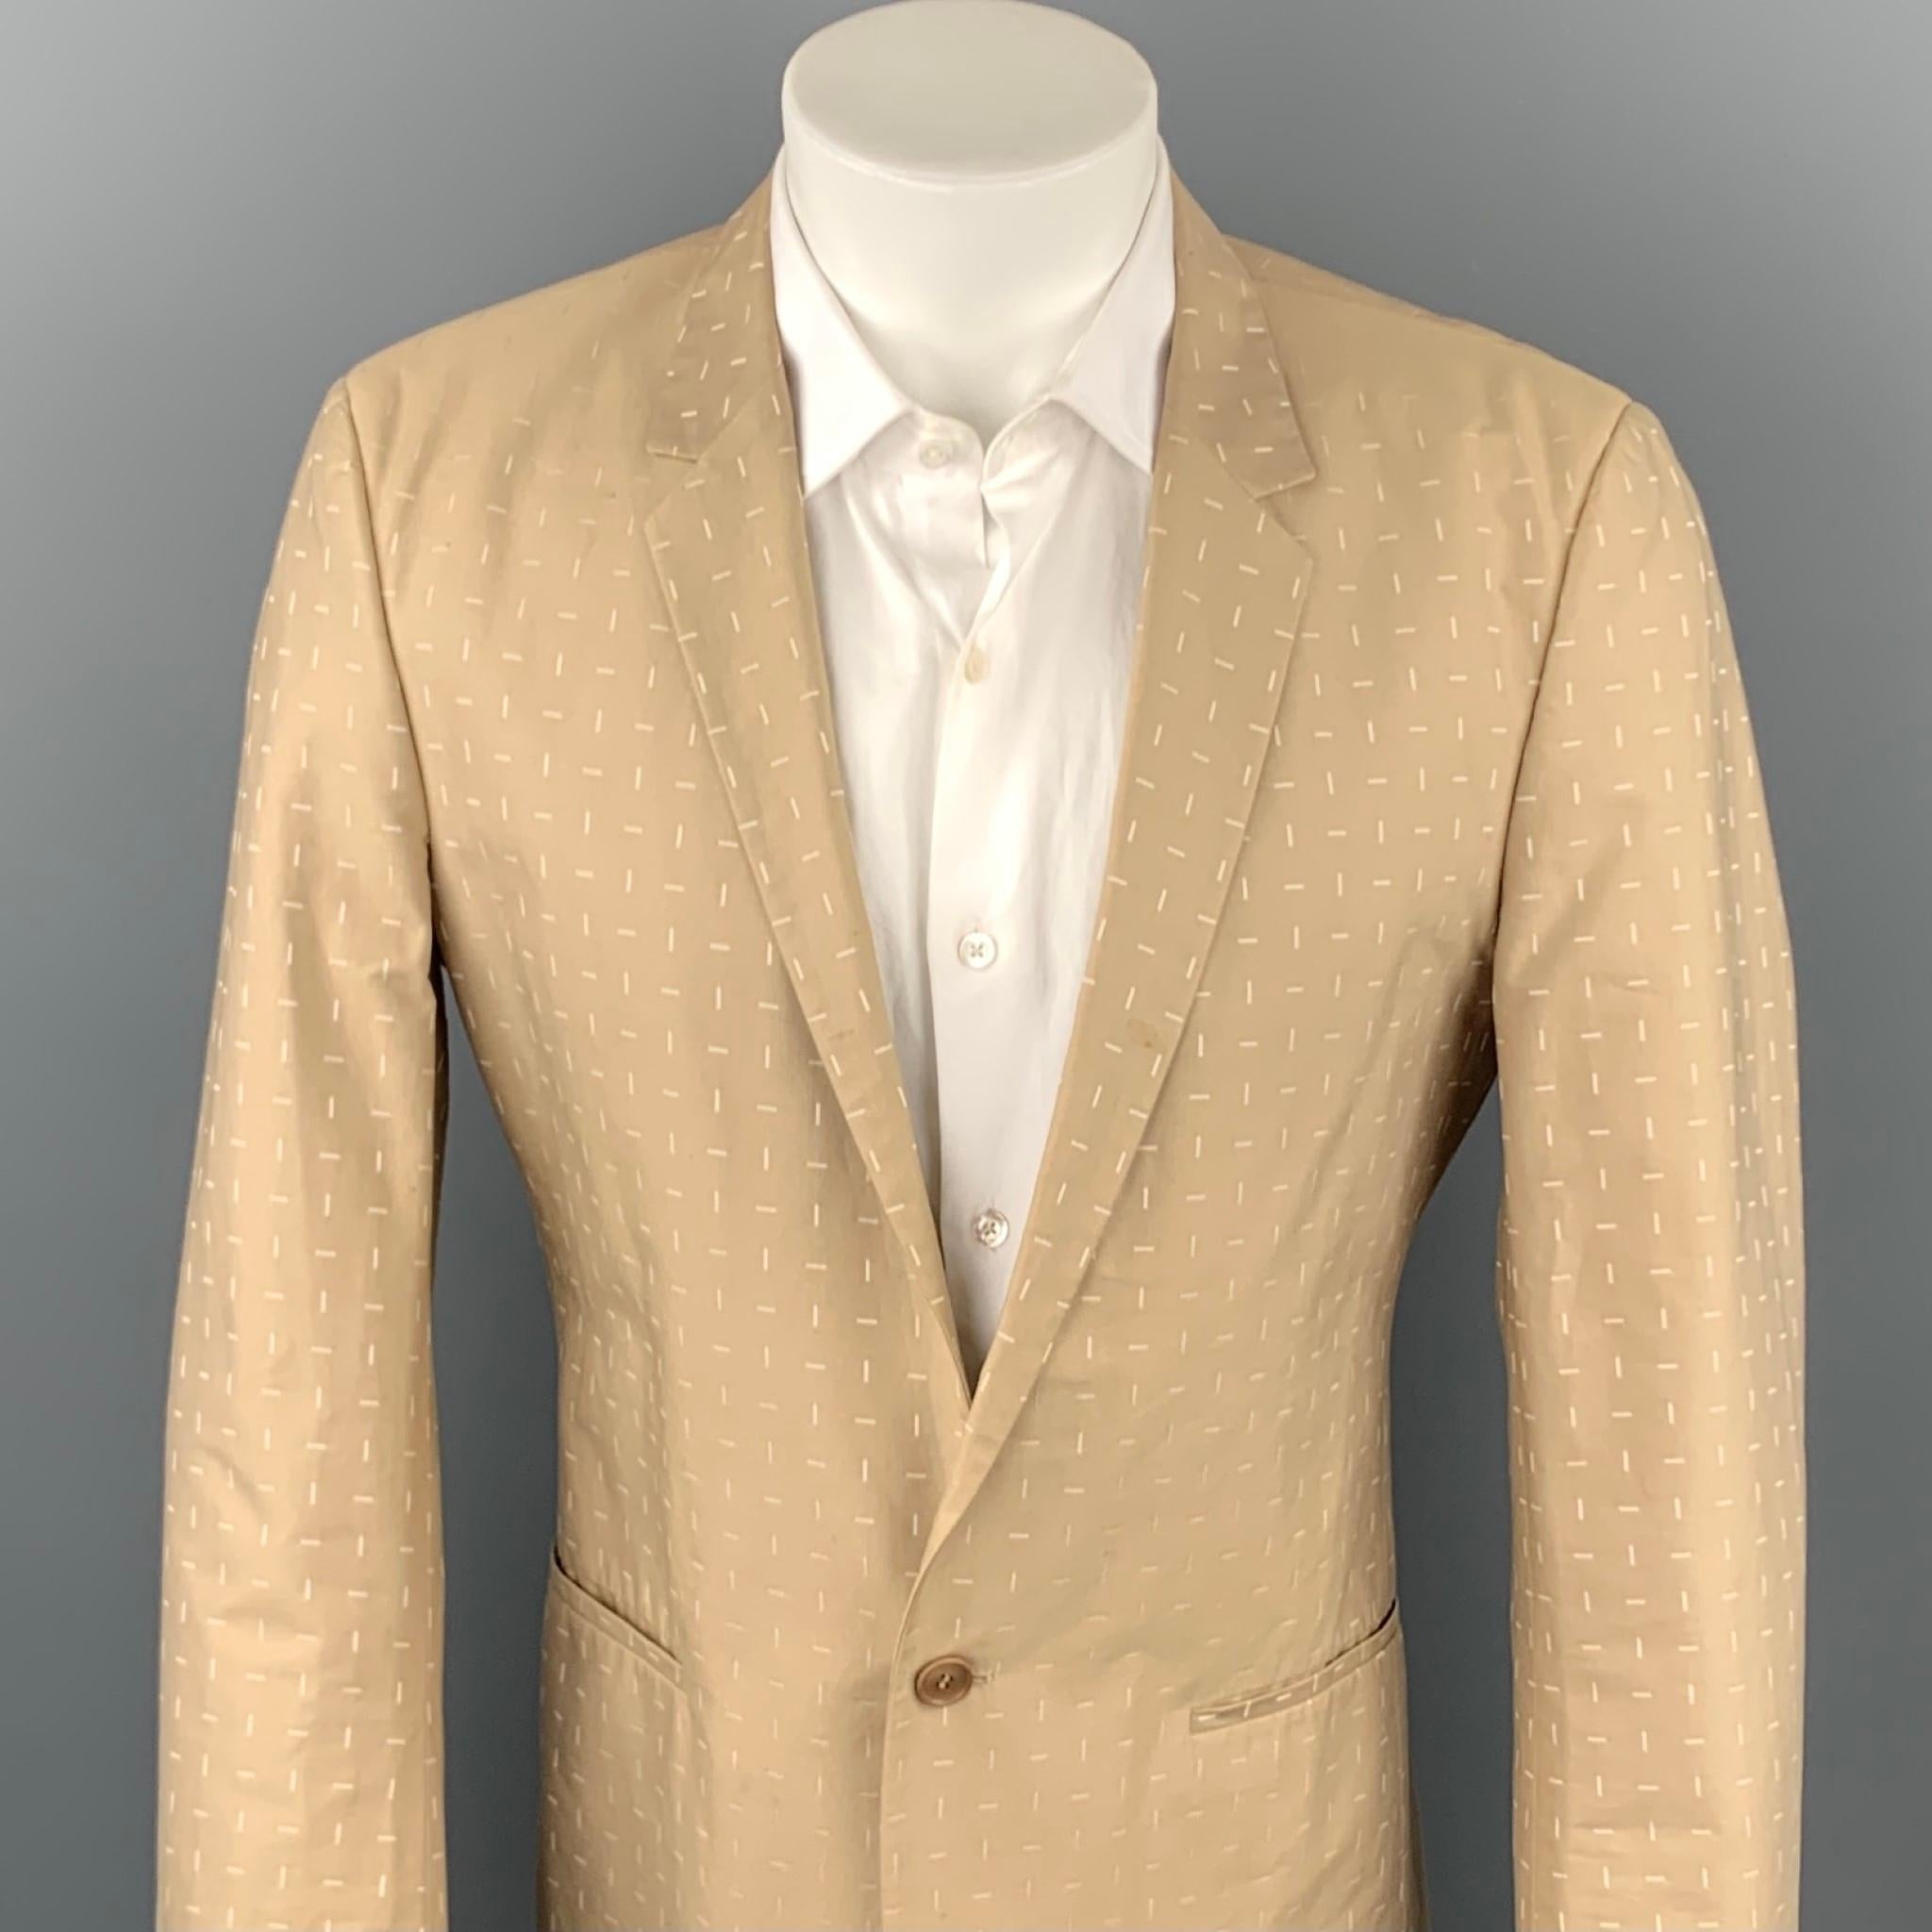 CALVIN KLEIN COLLECTION sport coat comes in a khaki print cotton with a full liner featuring a notch lapel, slit pockets, and a single button closure. Minor wear throughout.

Good Pre-Owned Condition.
Marked: 48/38

Measurements:

Shoulder: 18 in.